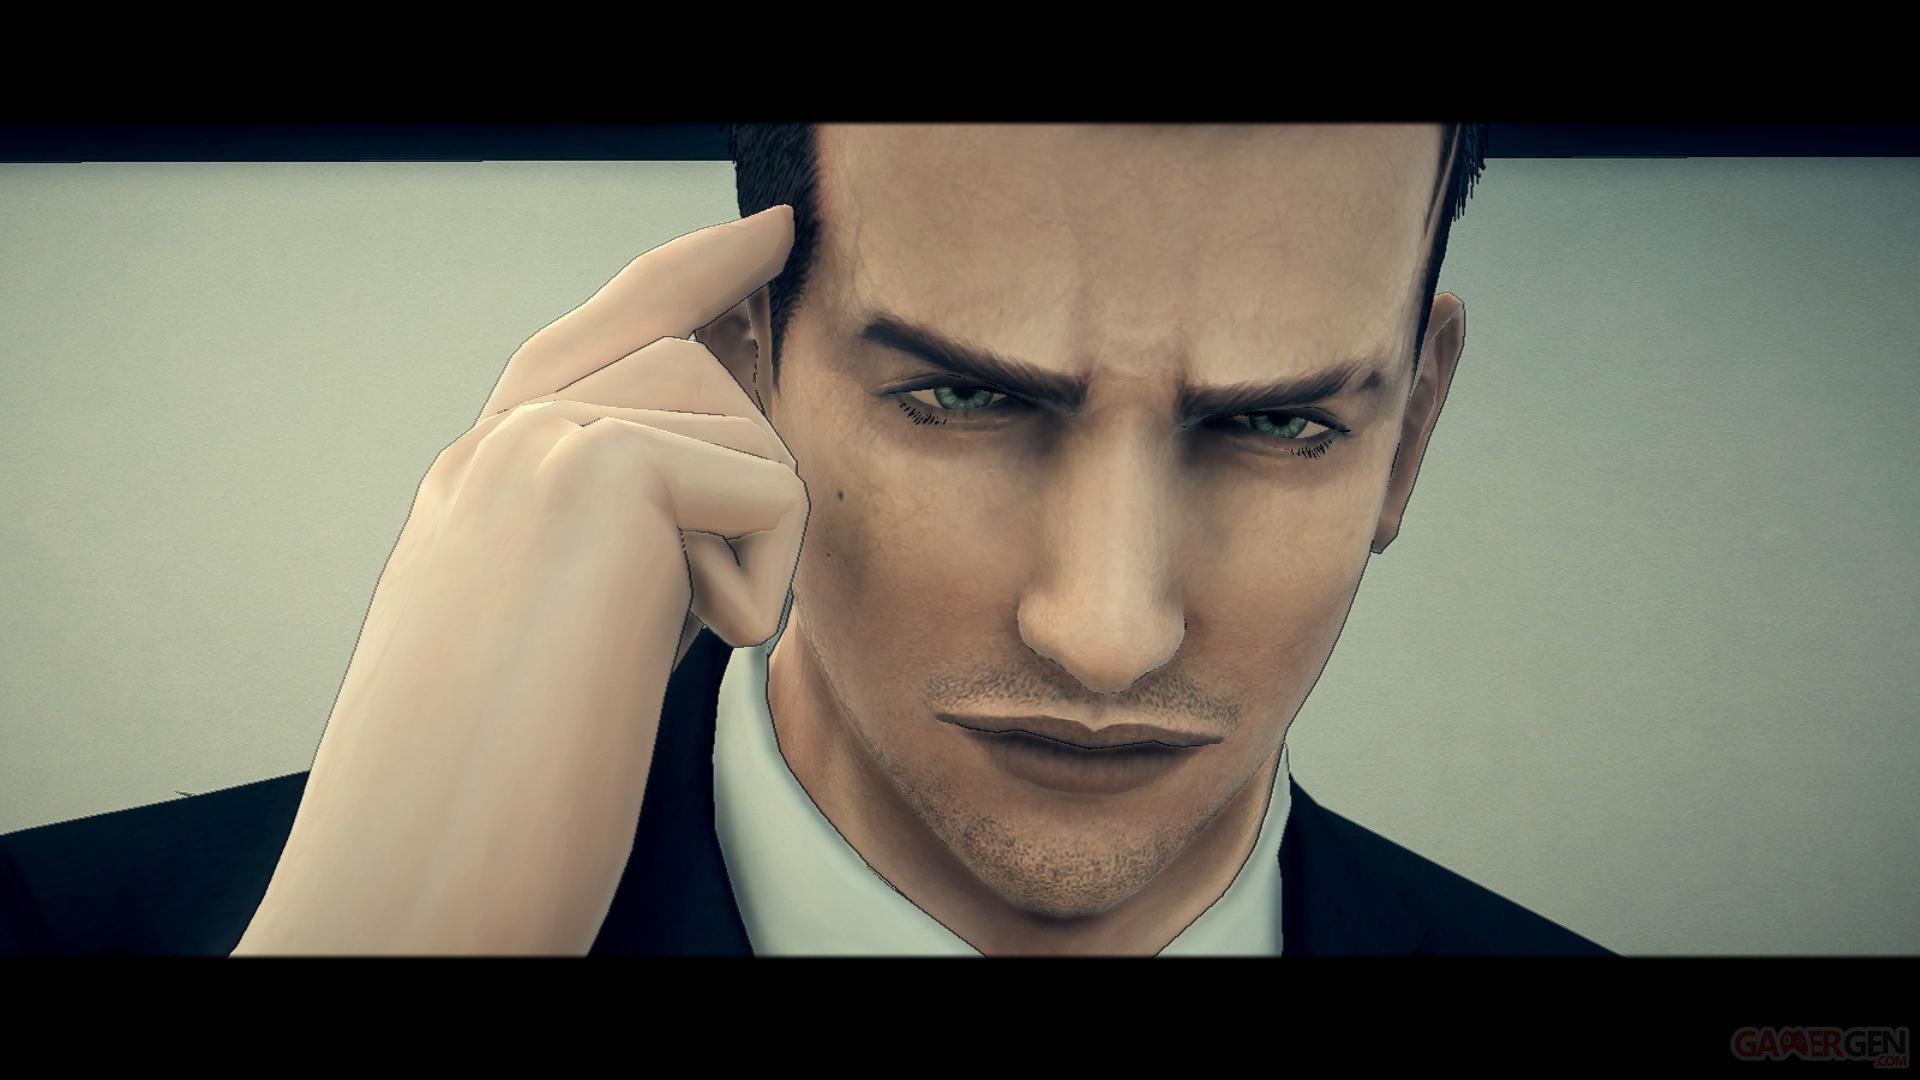 deadly premonition 2 a blessing in disguise review download free